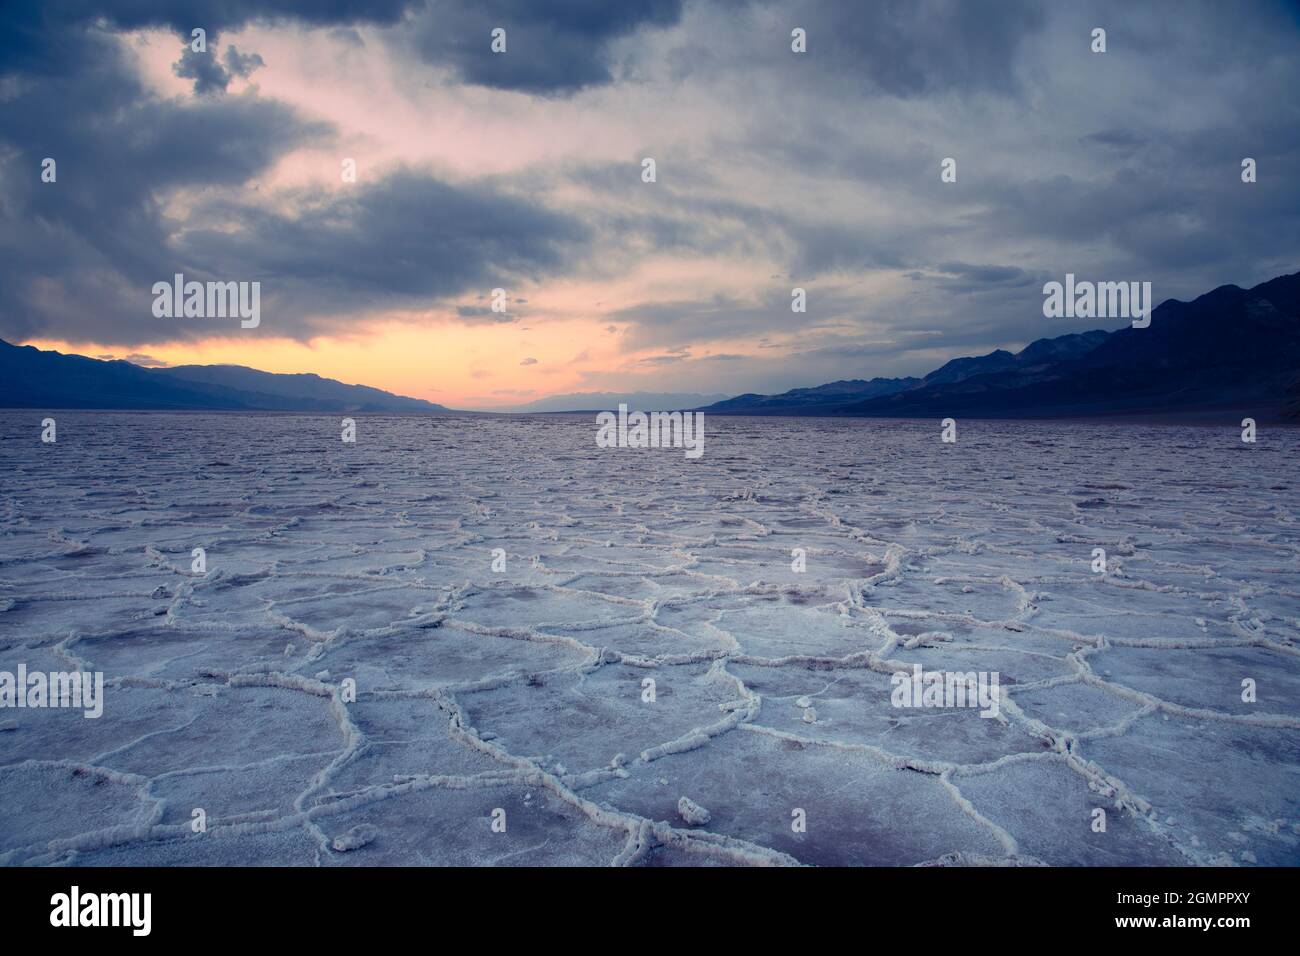 The salt pans of Badwater Basin at 282ft below sea level, Death Valley, California. Stock Photo